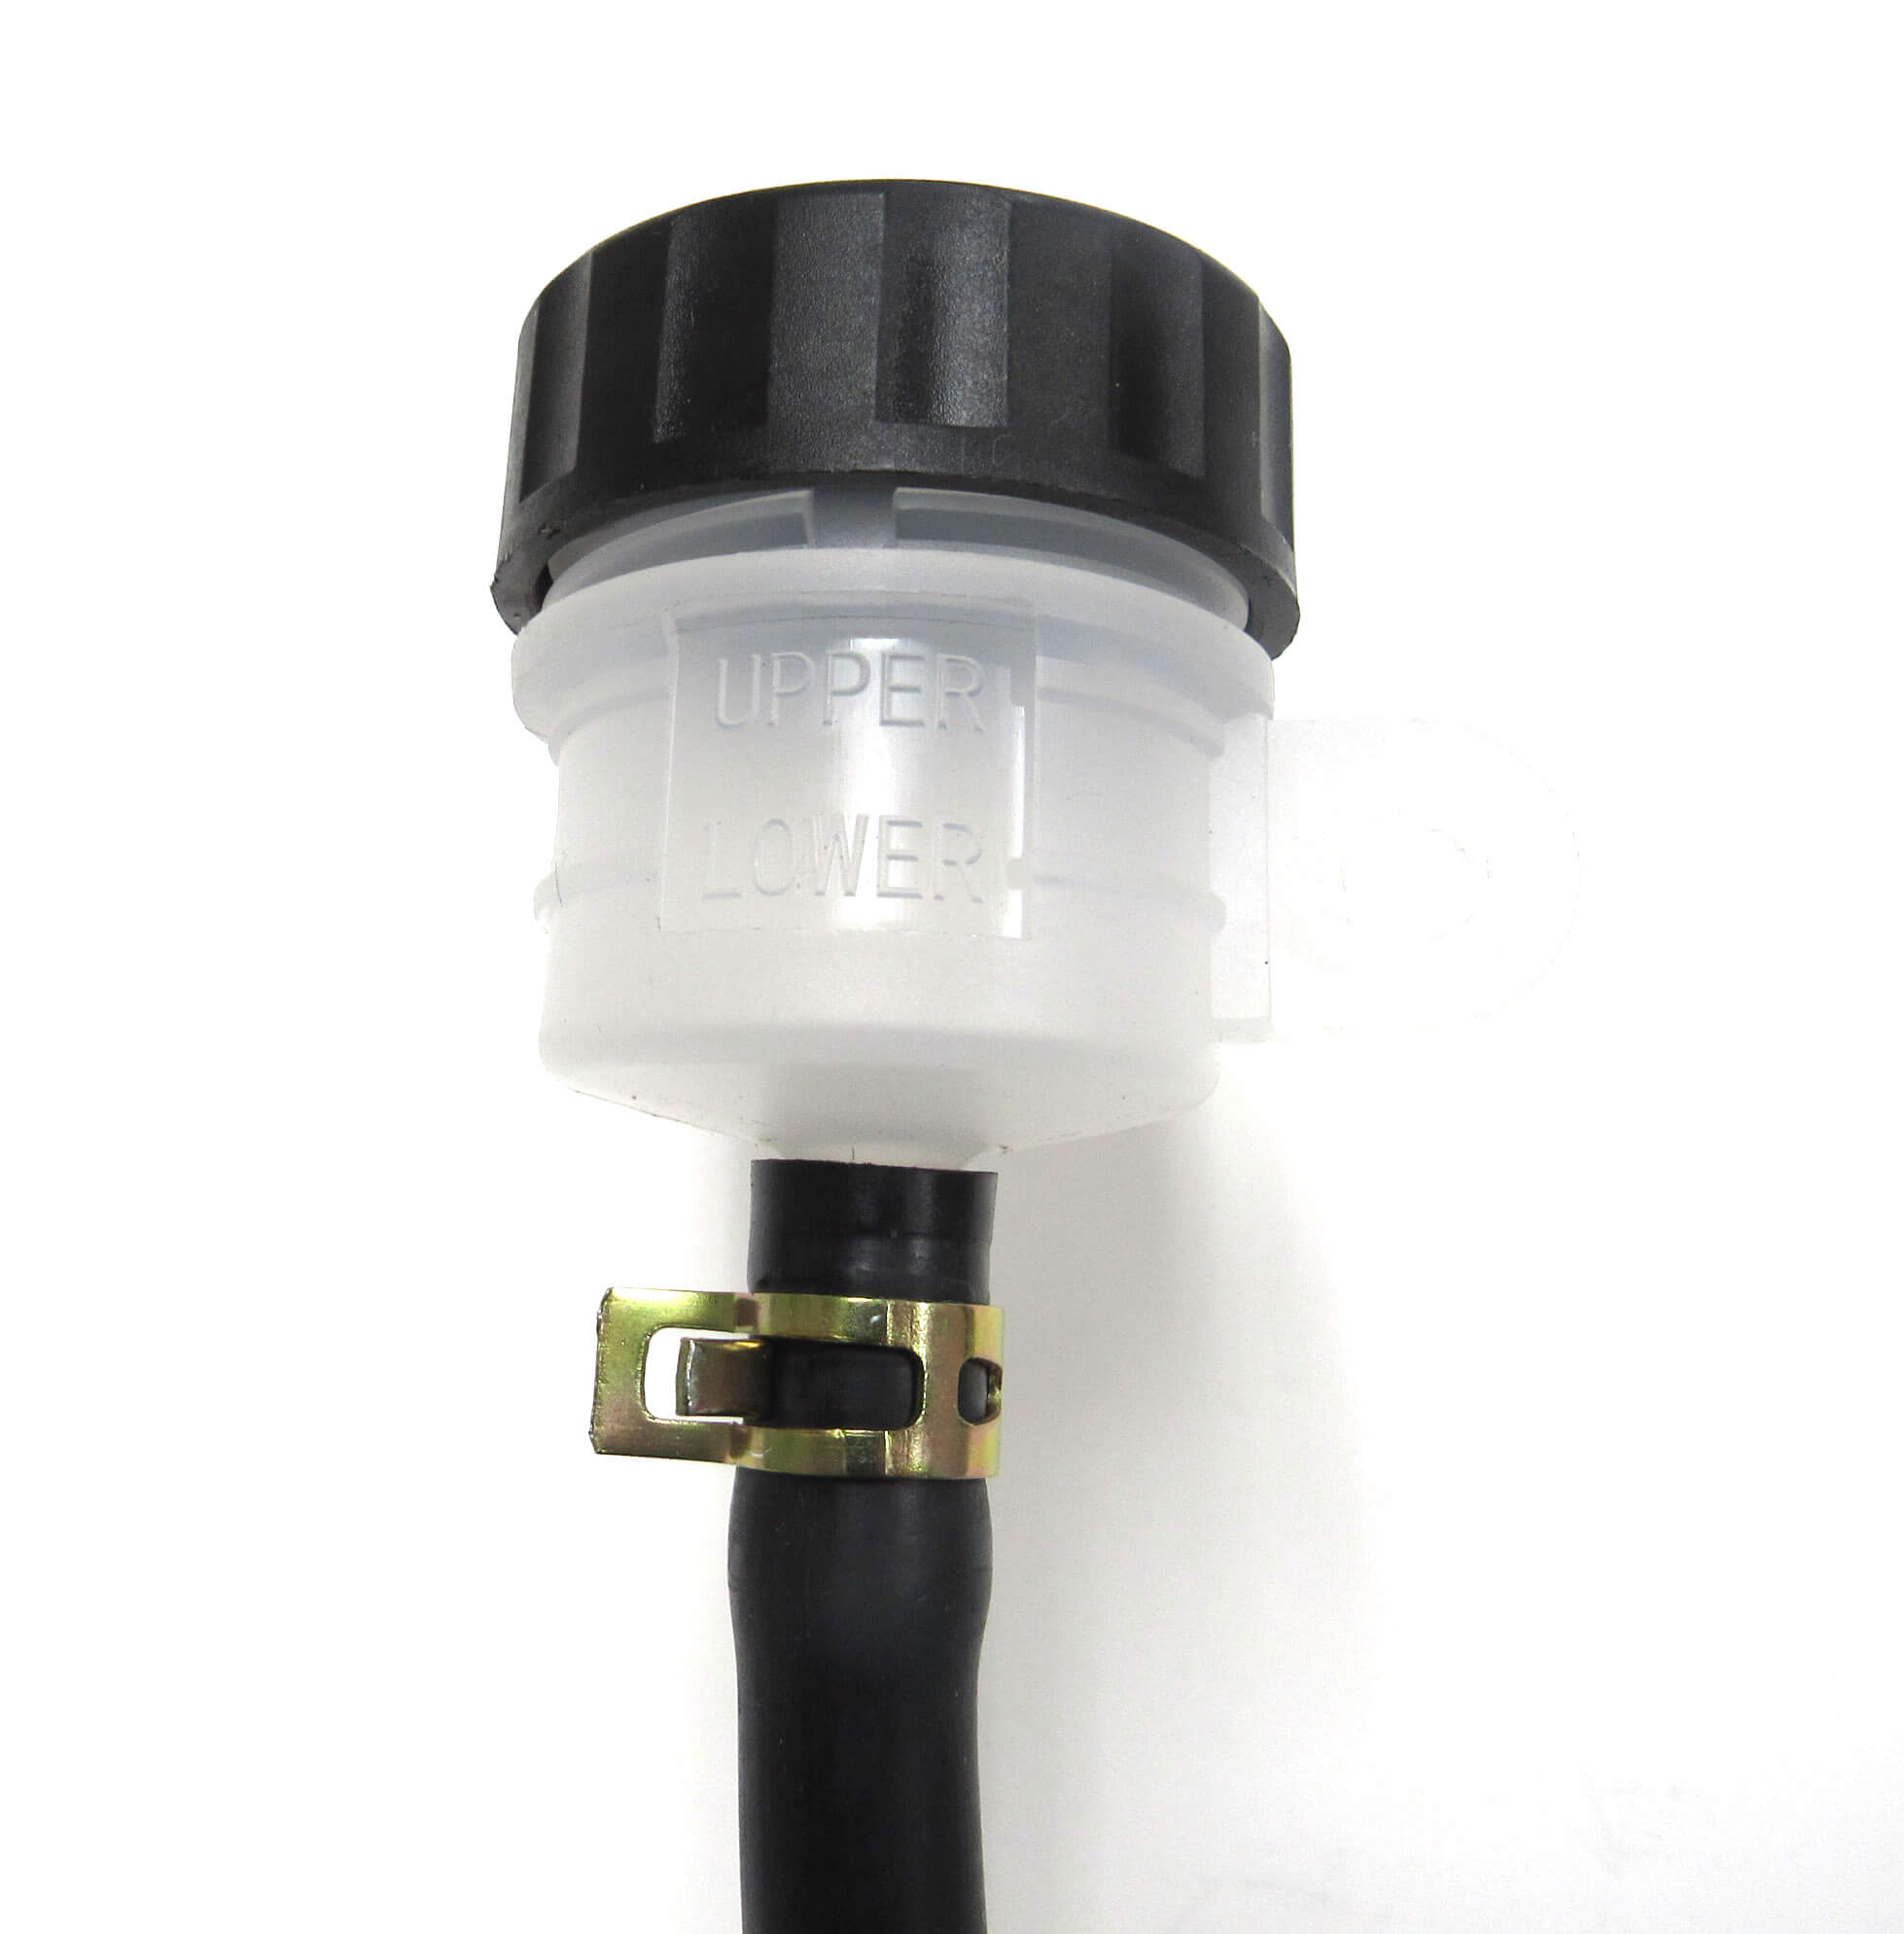 Brake Fluid Reservoir Fits Many ATVs, Go Karts and Motorcycles with Foot Brakes